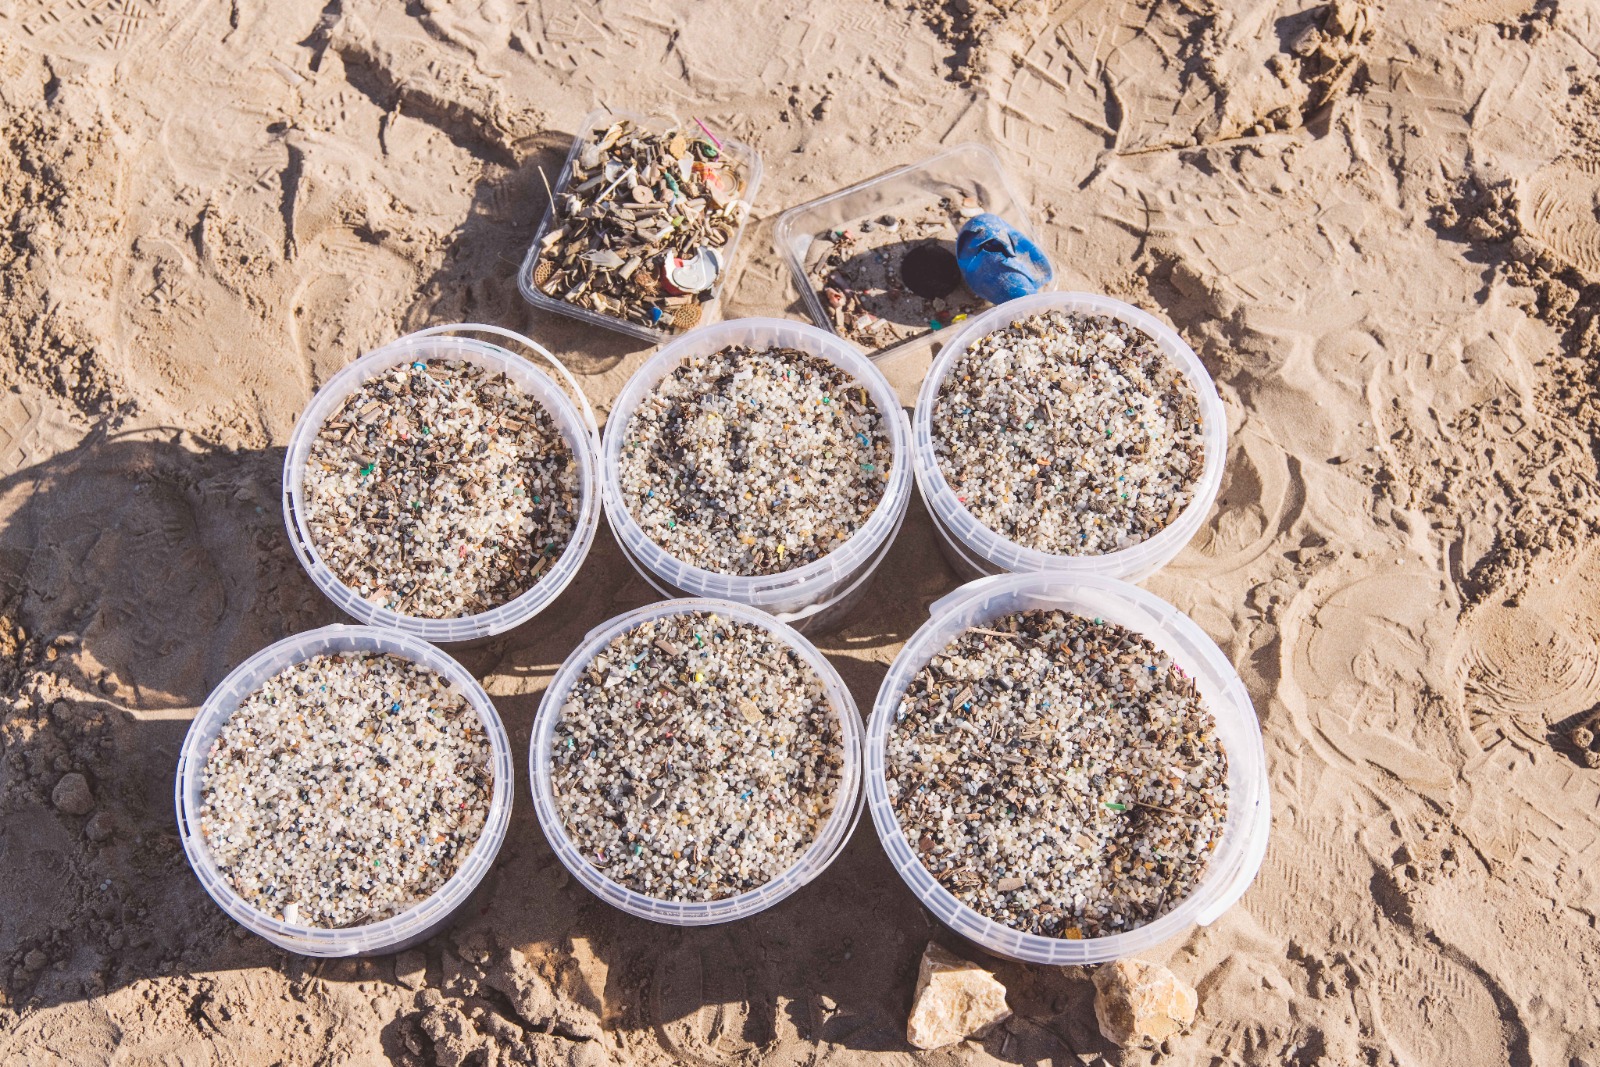 Credit Good Karma Projects la Pineda Beach Spain there is an accumulation zone with plenty of pellets over 1000 found in 120 mins 46 volunteers 13112021 pic 2